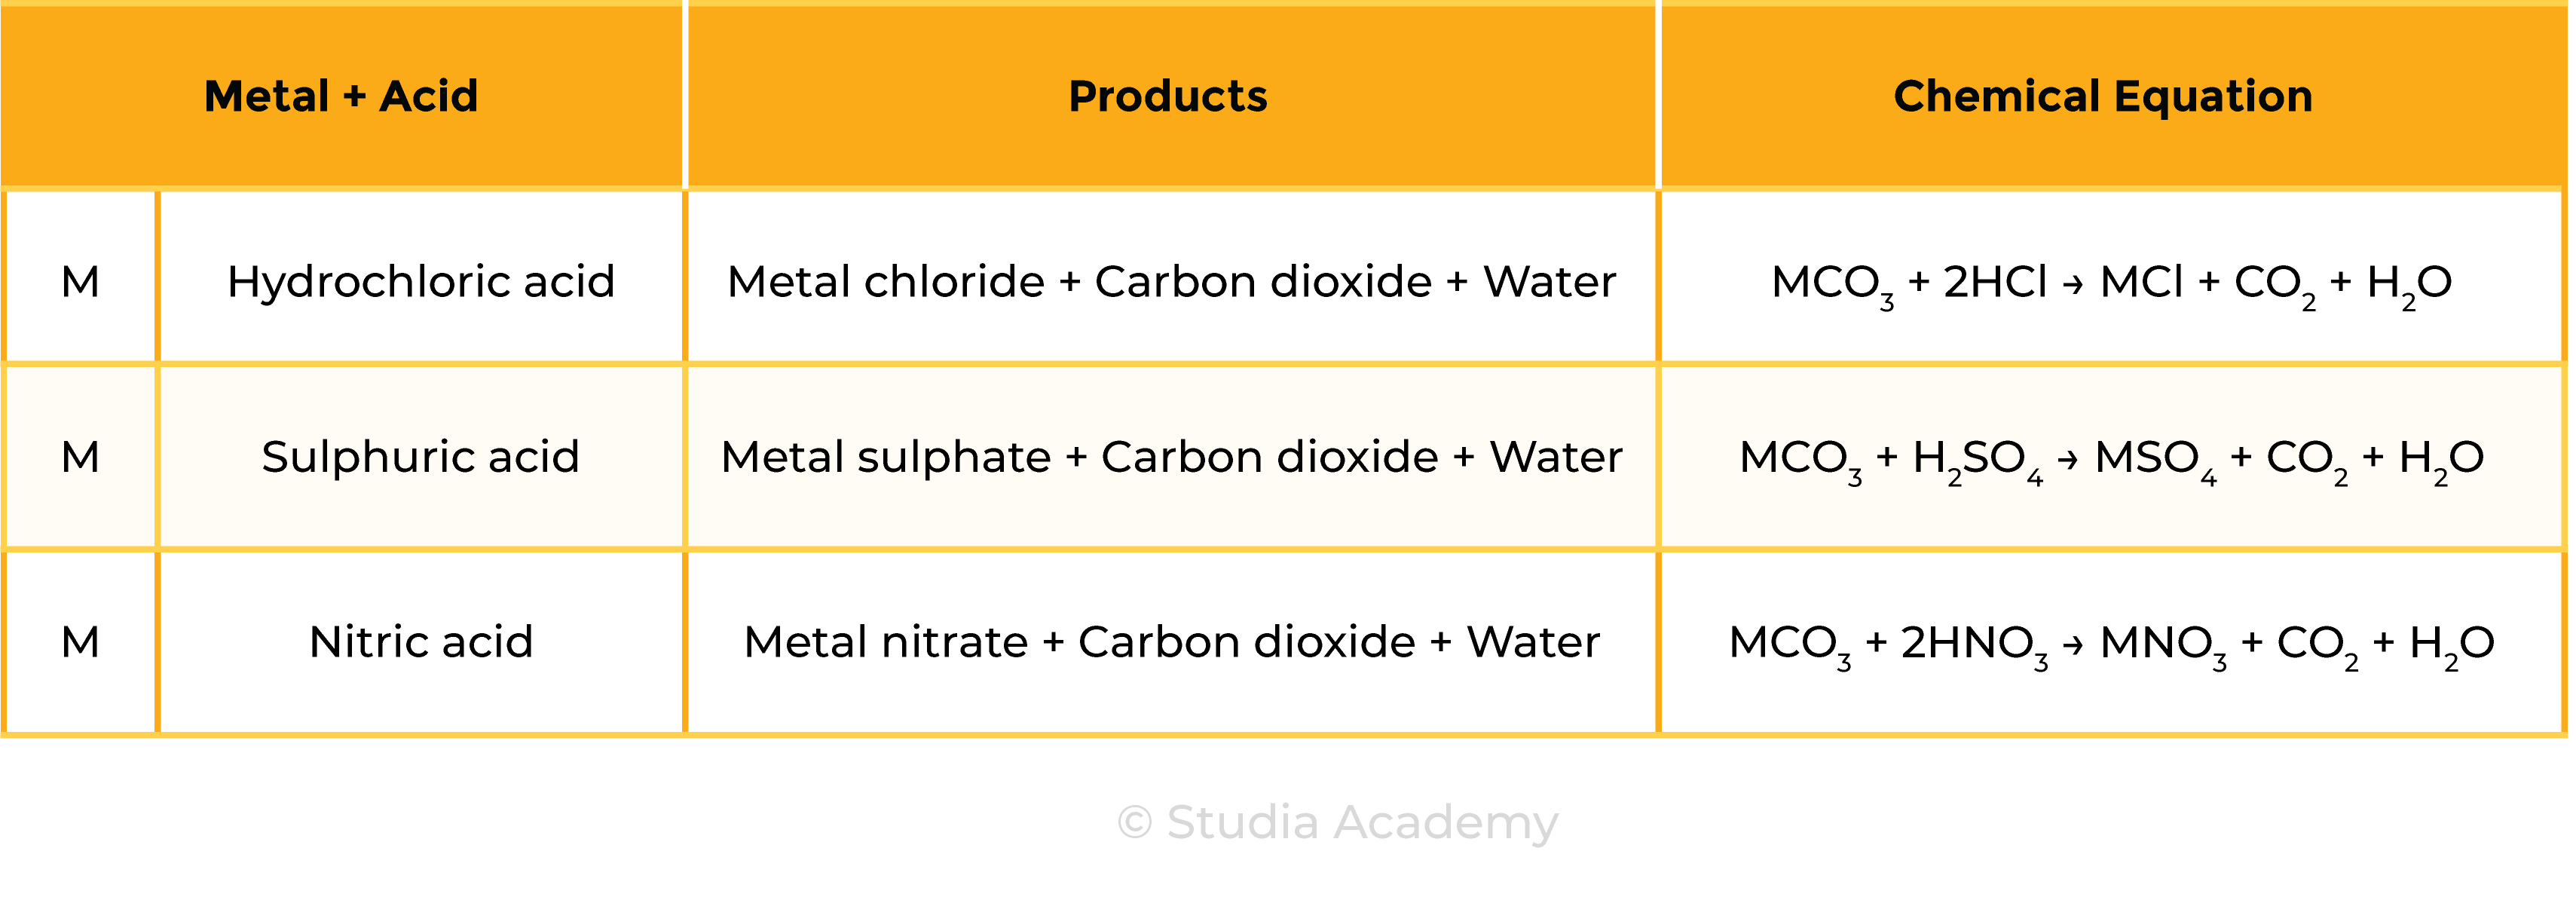 edexcel_igcse_chemistry_topic 16 tables_acids, bases, and salt preparations_003_metal carbonate and acid reactions